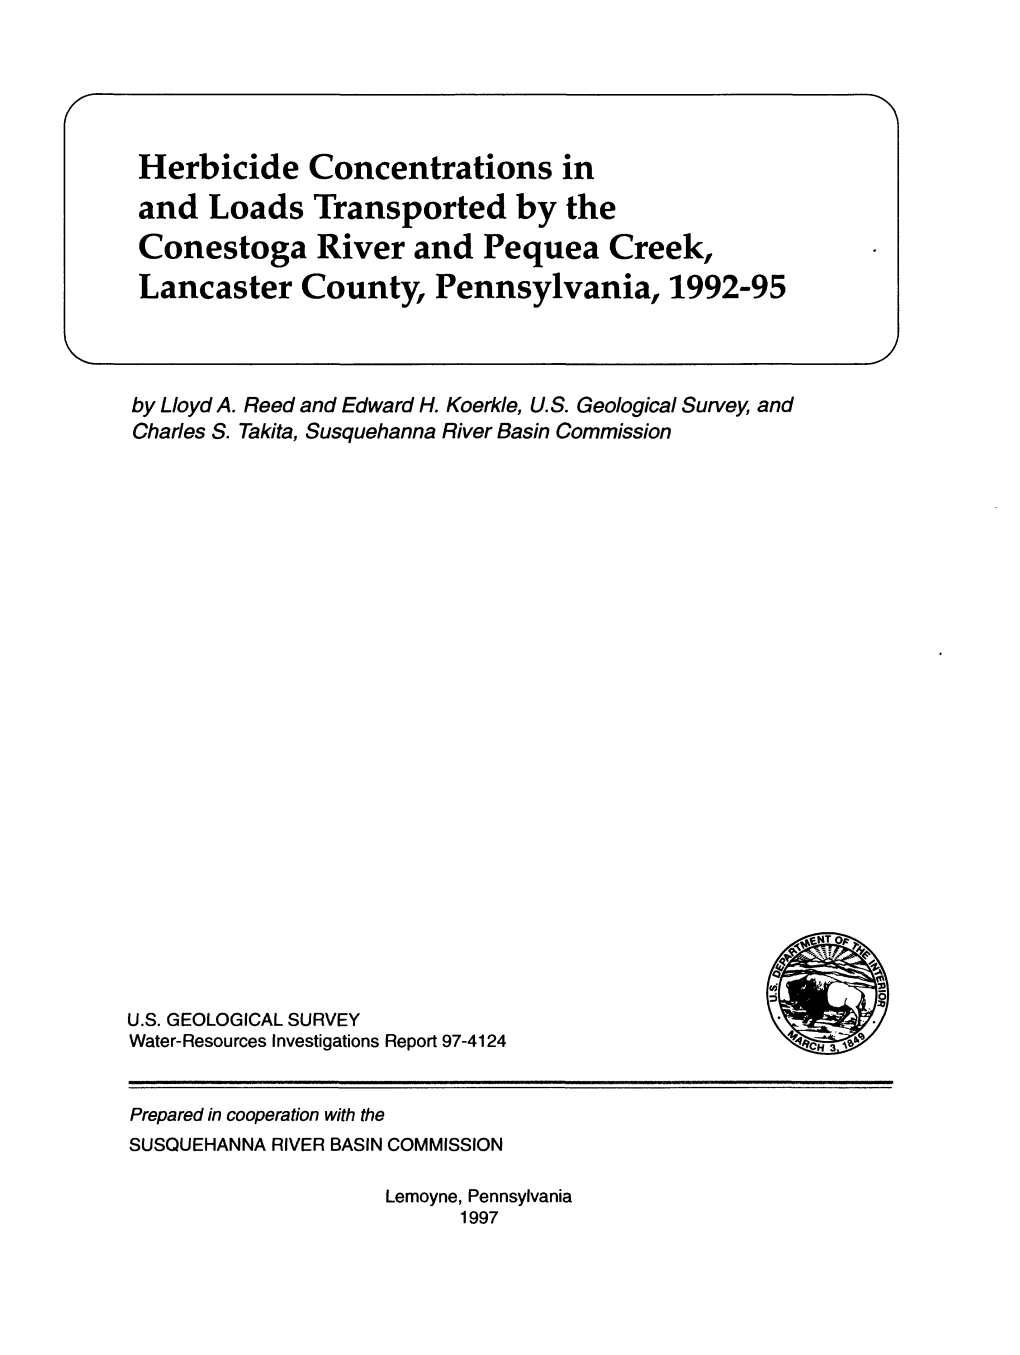 Herbicide Concentrations in and Loads Transported by the Conestoga River and Pequea Creek, Lancaster County, Pennsylvania, 1992-95